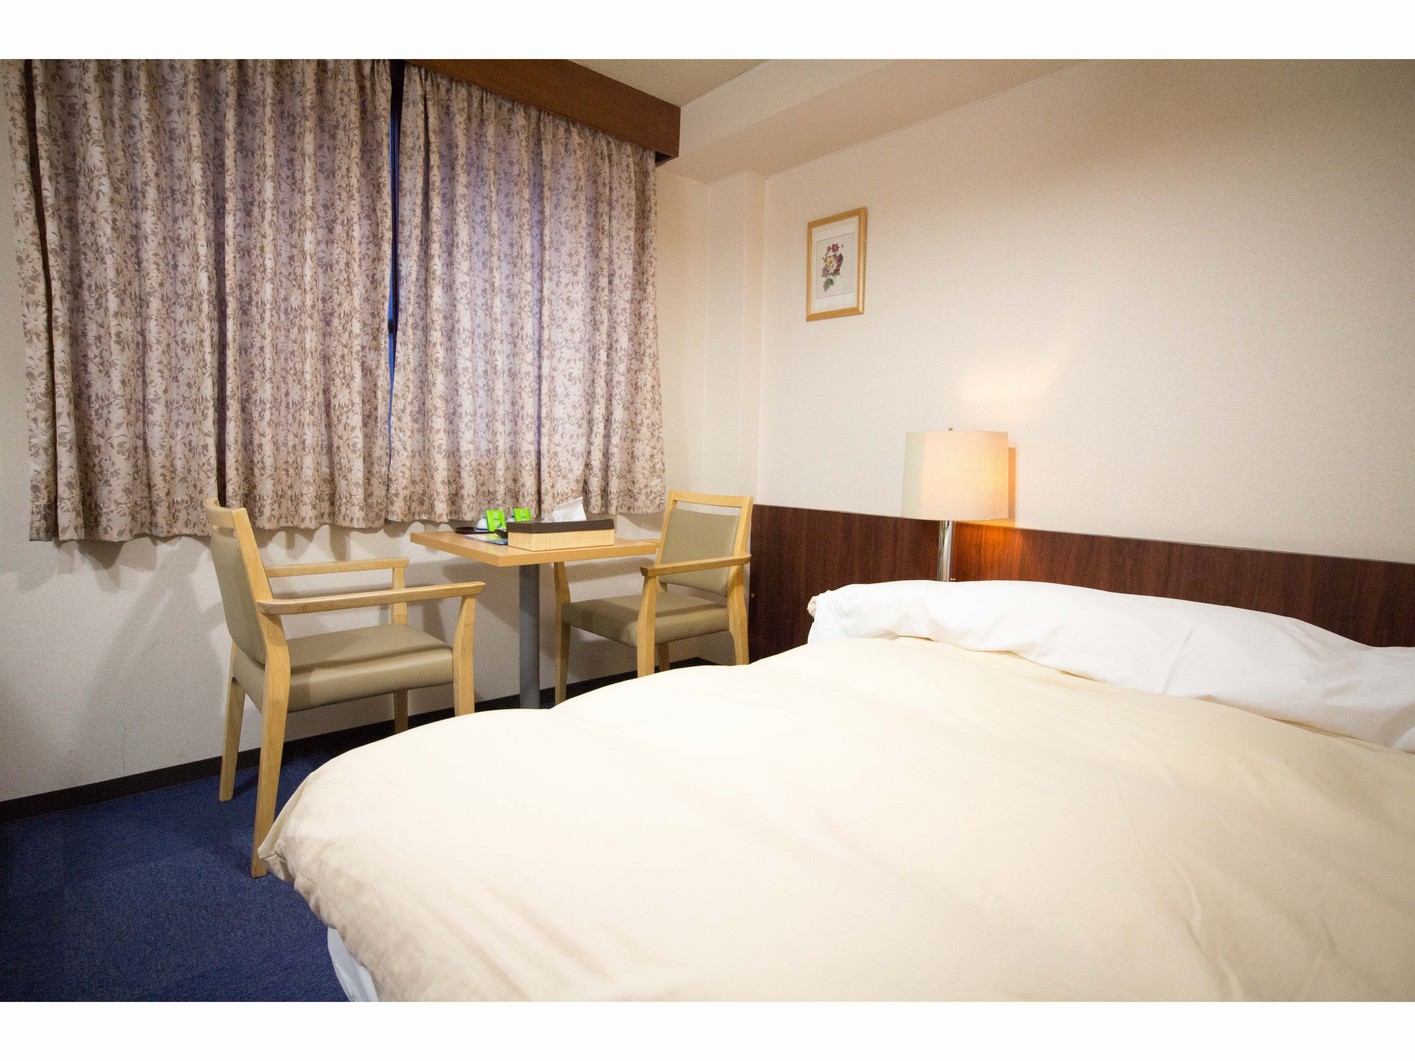 Hotel Nakanoshima Hotel Nakanoshima is a popular choice amongst travelers in Sobetsu, whether exploring or just passing through. The property offers a high standard of service and amenities to suit the individual needs